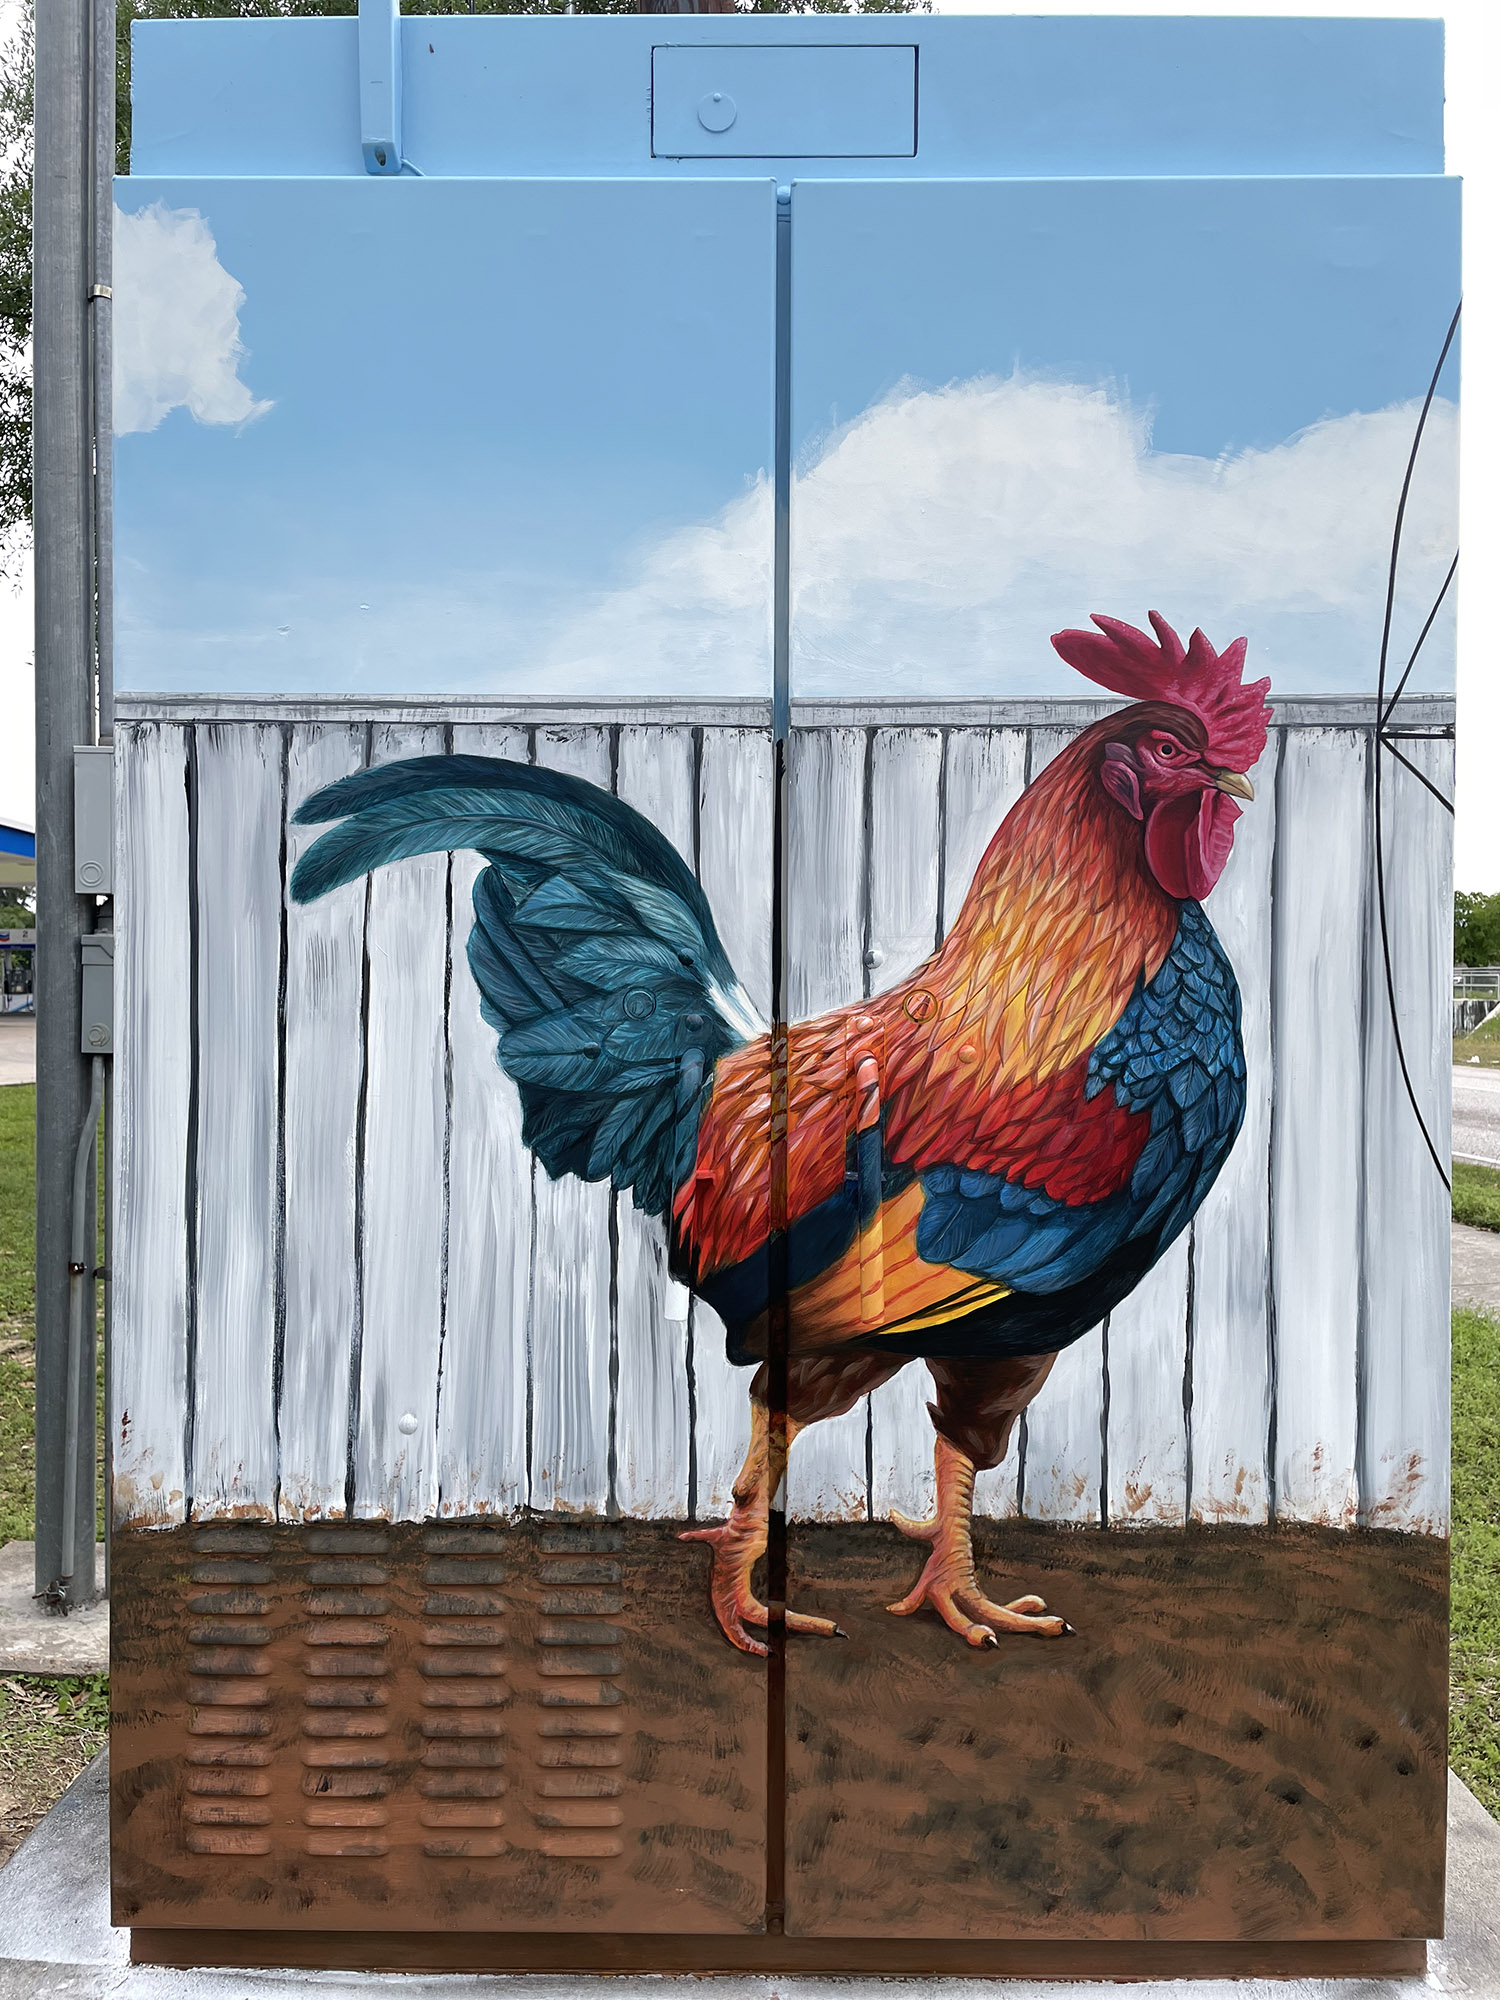 rooster mini mural sacred geometry big cock fight street art houston artist surrealism electrical box